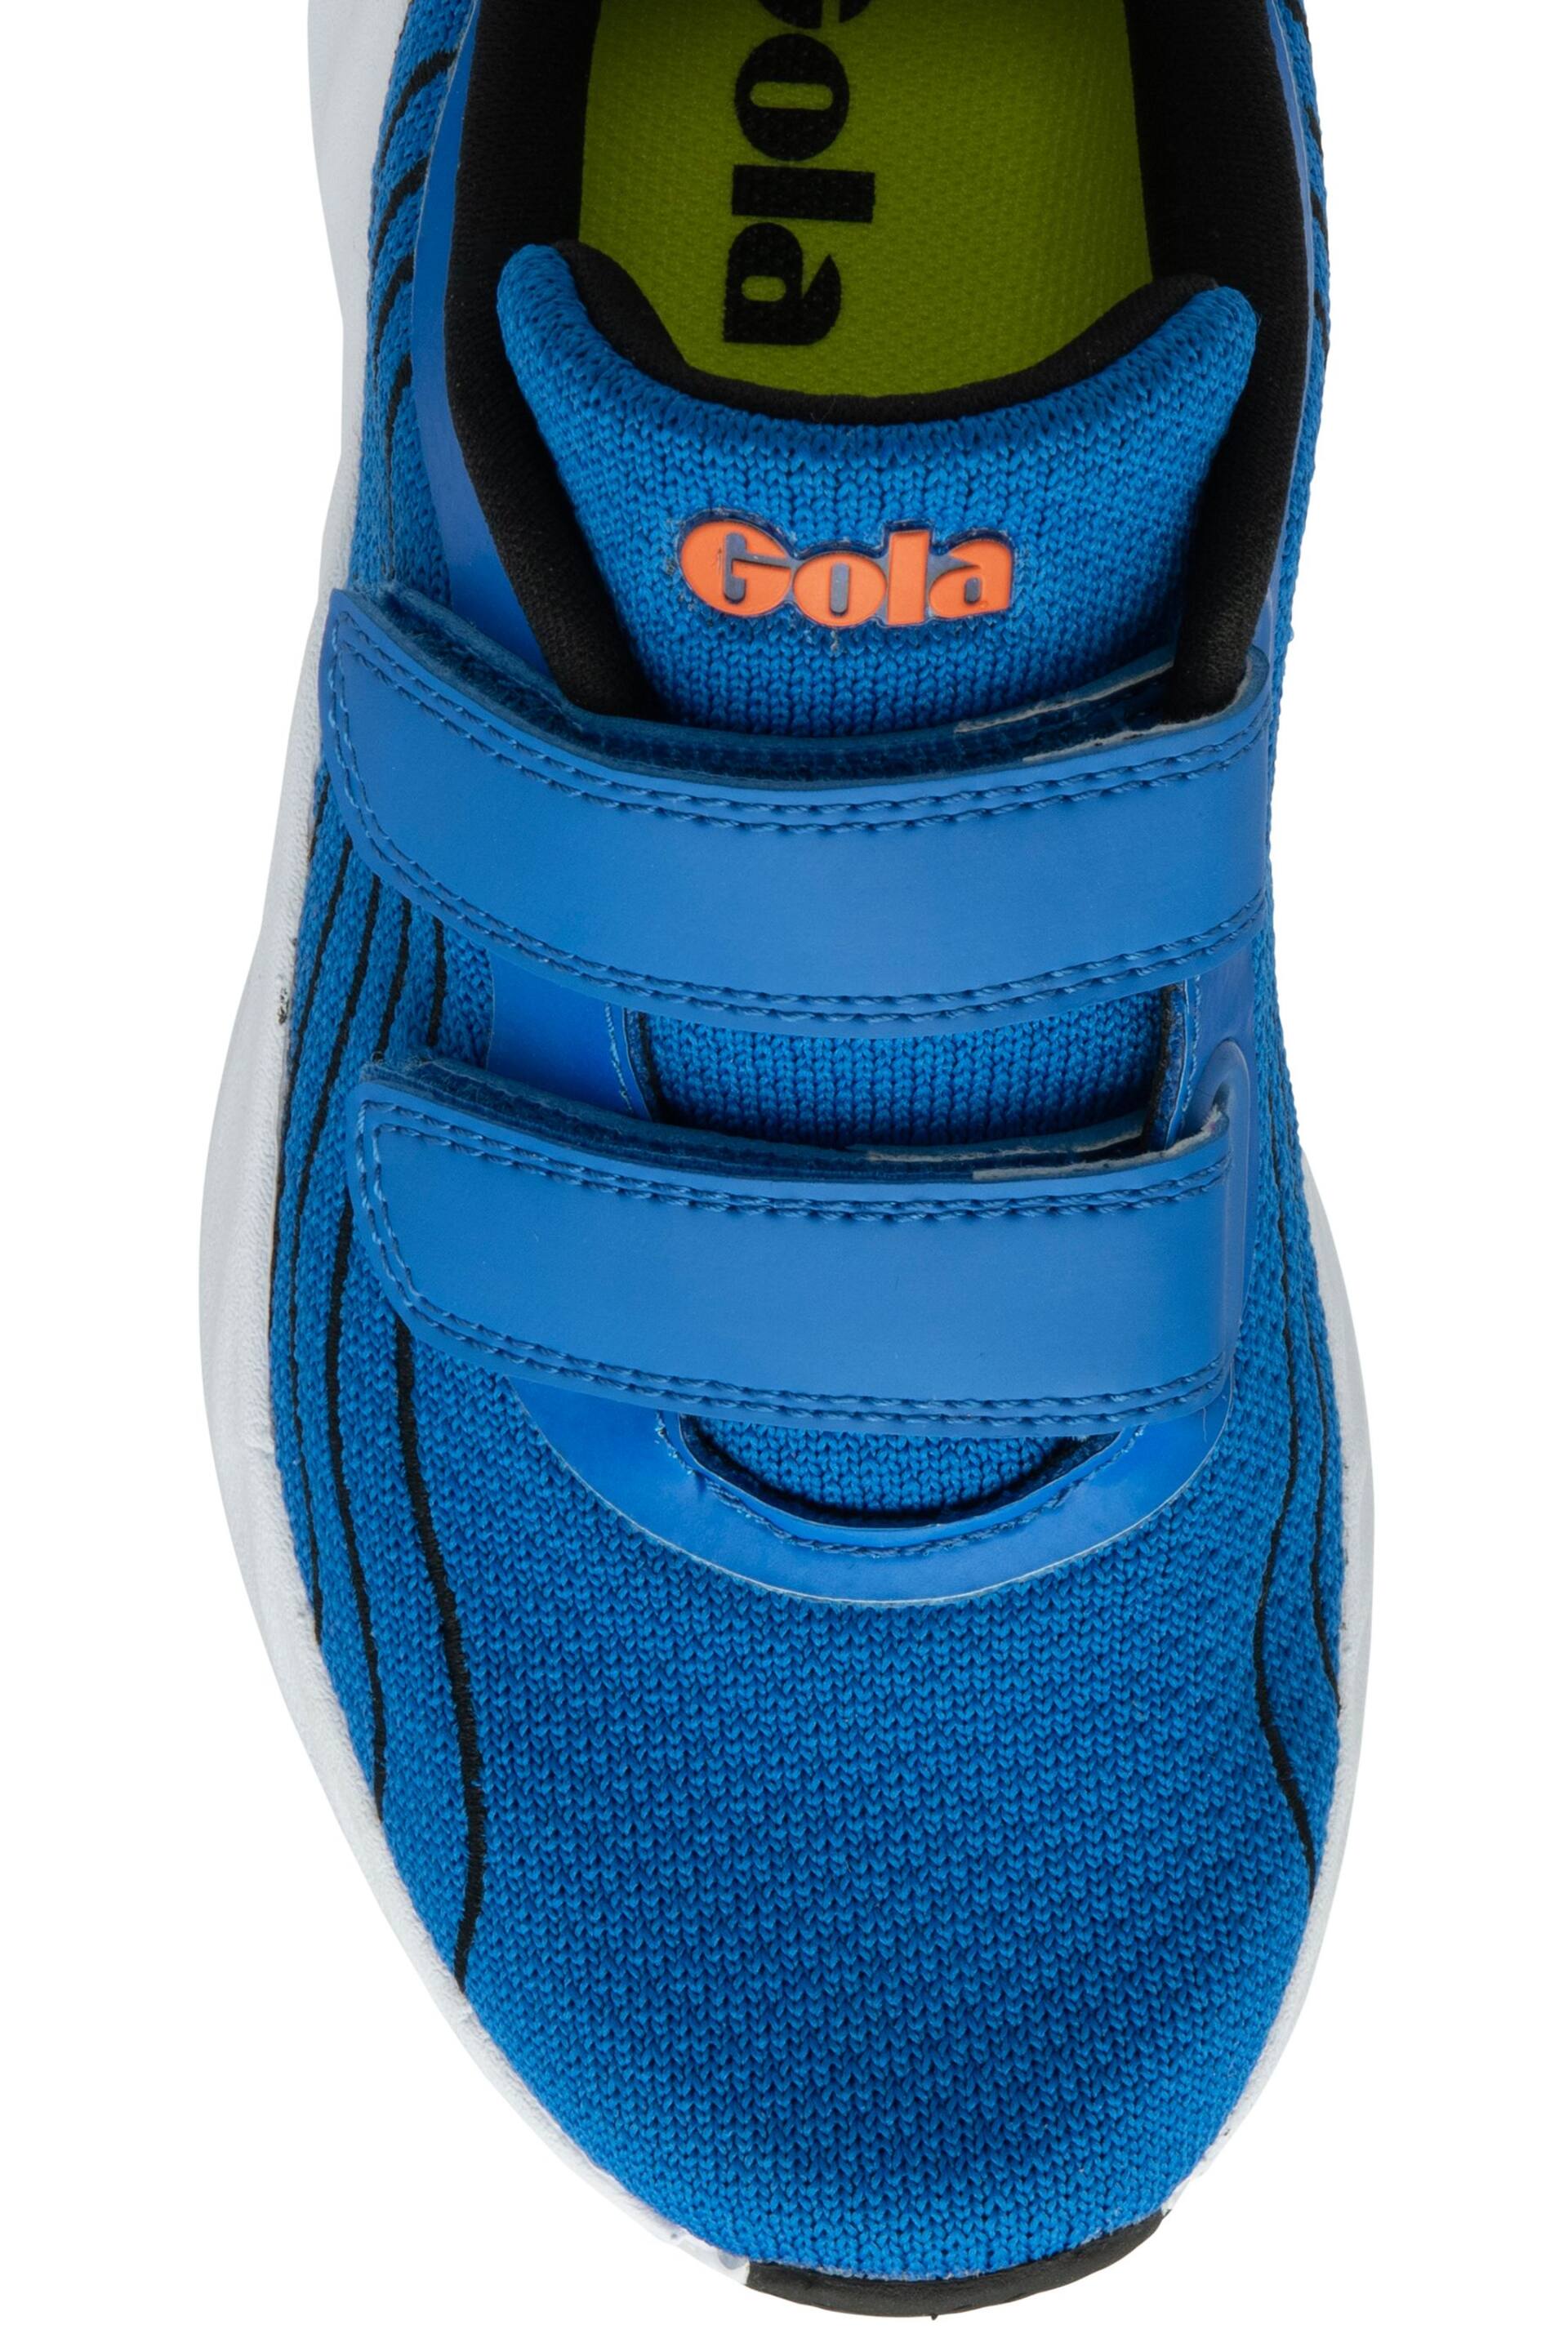 Gola Blue Alzir Twin Bar Quick Fasten Kids Training Trainers - Image 4 of 4